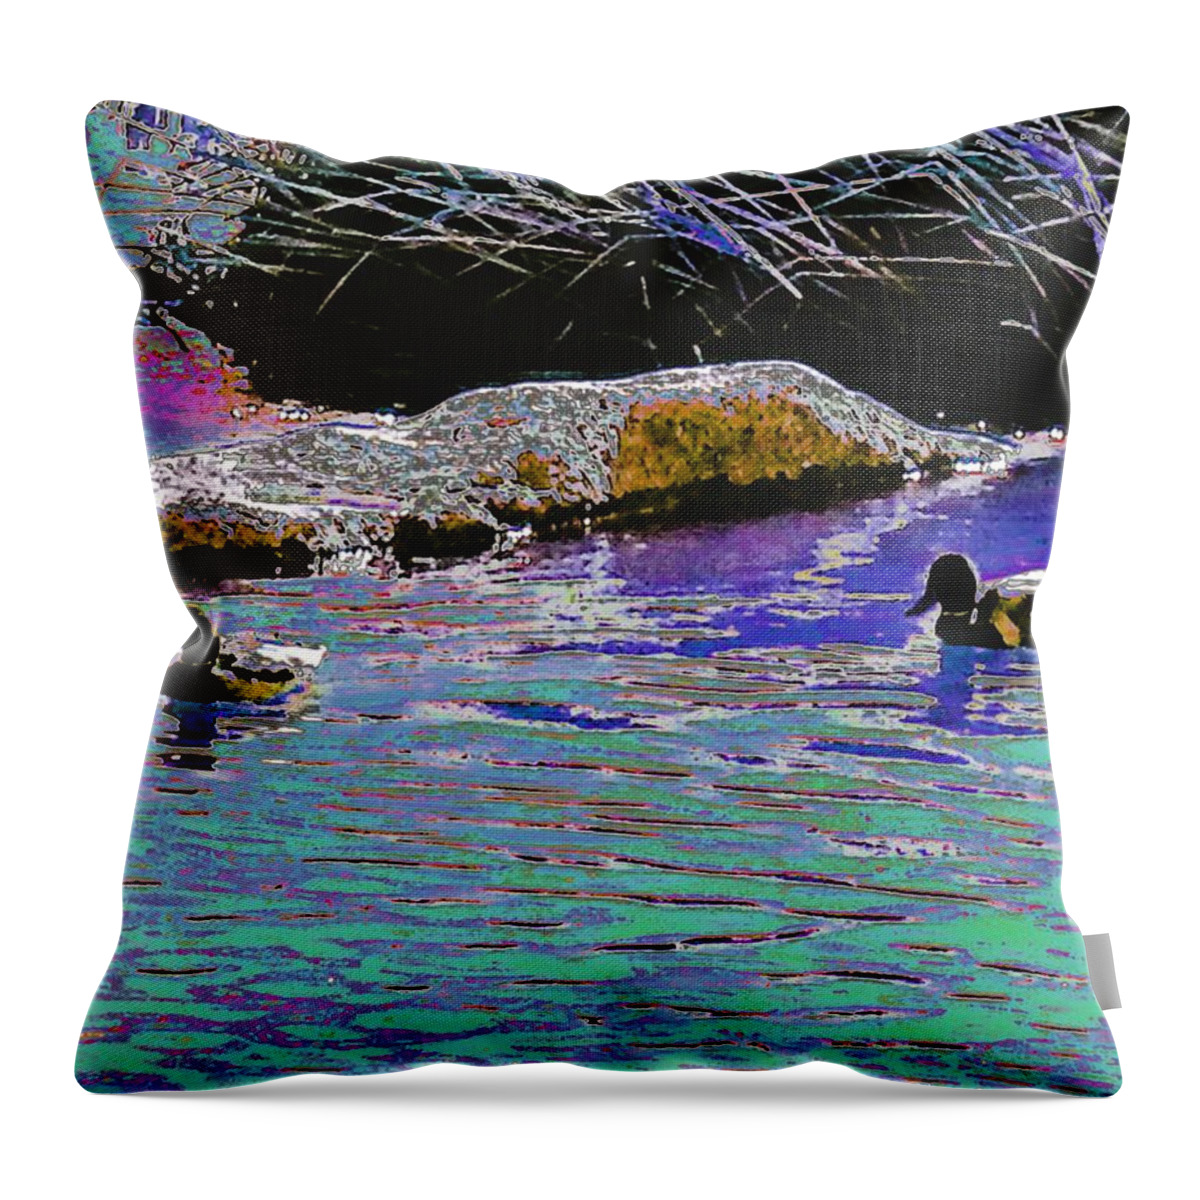 Ducks Throw Pillow featuring the photograph Ducks in Colored River by Andrew Lawrence